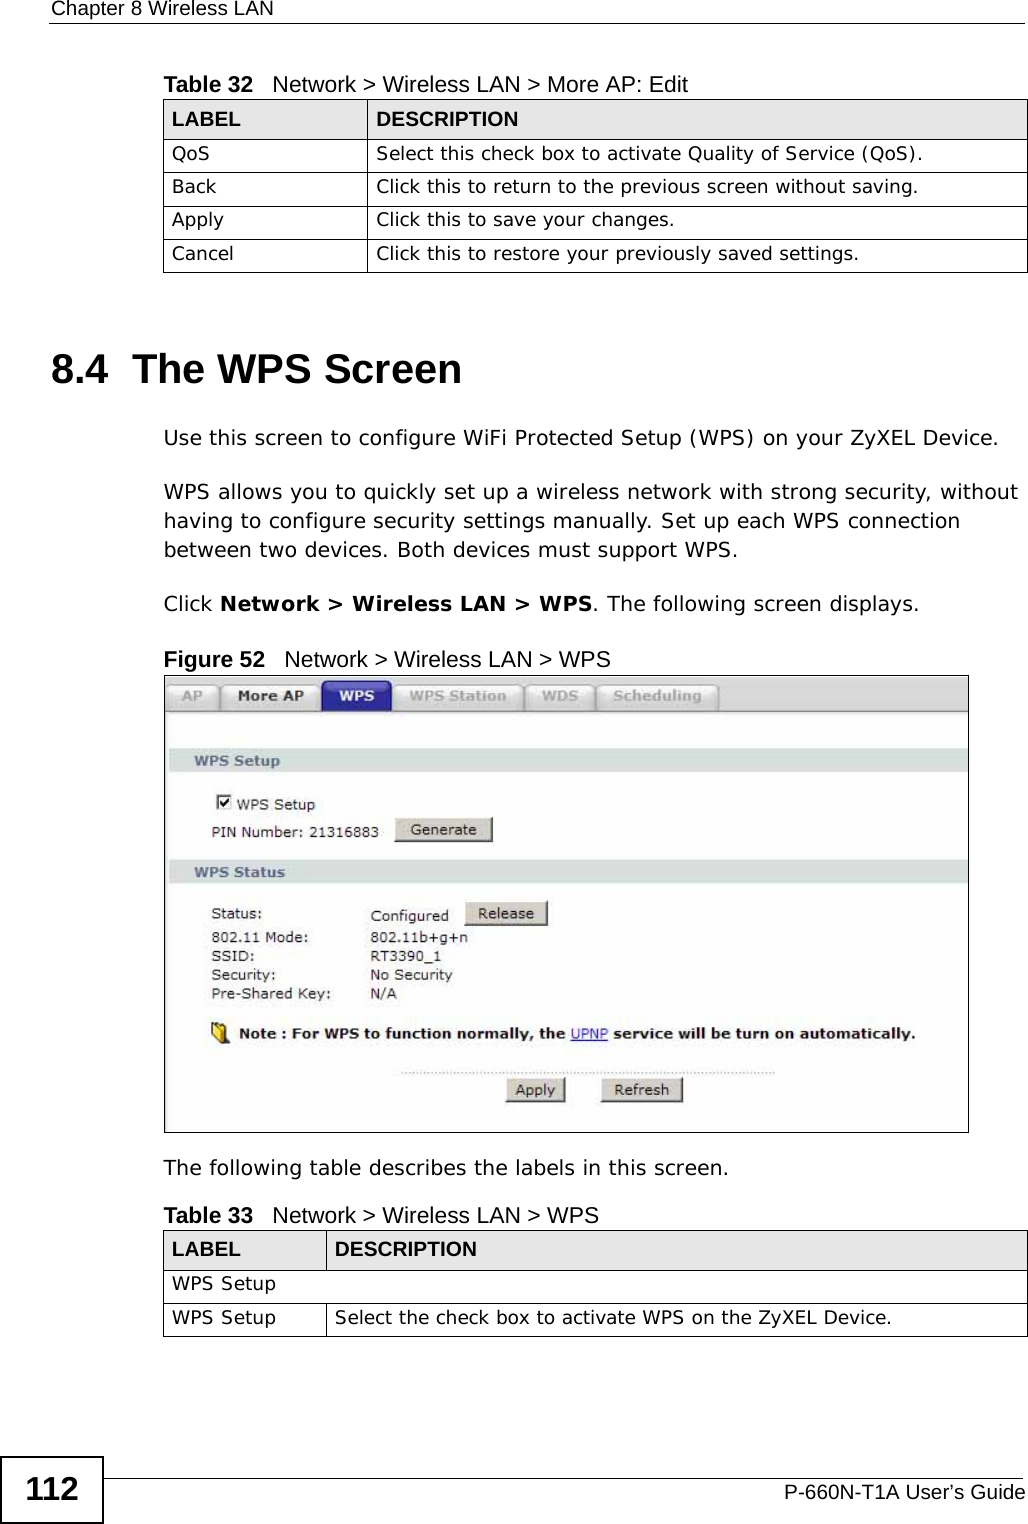 Chapter 8 Wireless LANP-660N-T1A User’s Guide1128.4  The WPS ScreenUse this screen to configure WiFi Protected Setup (WPS) on your ZyXEL Device.WPS allows you to quickly set up a wireless network with strong security, without having to configure security settings manually. Set up each WPS connection between two devices. Both devices must support WPS.Click Network &gt; Wireless LAN &gt; WPS. The following screen displays.Figure 52   Network &gt; Wireless LAN &gt; WPSThe following table describes the labels in this screen.QoS Select this check box to activate Quality of Service (QoS).Back Click this to return to the previous screen without saving.Apply Click this to save your changes.Cancel Click this to restore your previously saved settings.Table 32   Network &gt; Wireless LAN &gt; More AP: EditLABEL DESCRIPTIONTable 33   Network &gt; Wireless LAN &gt; WPSLABEL DESCRIPTIONWPS SetupWPS Setup Select the check box to activate WPS on the ZyXEL Device.